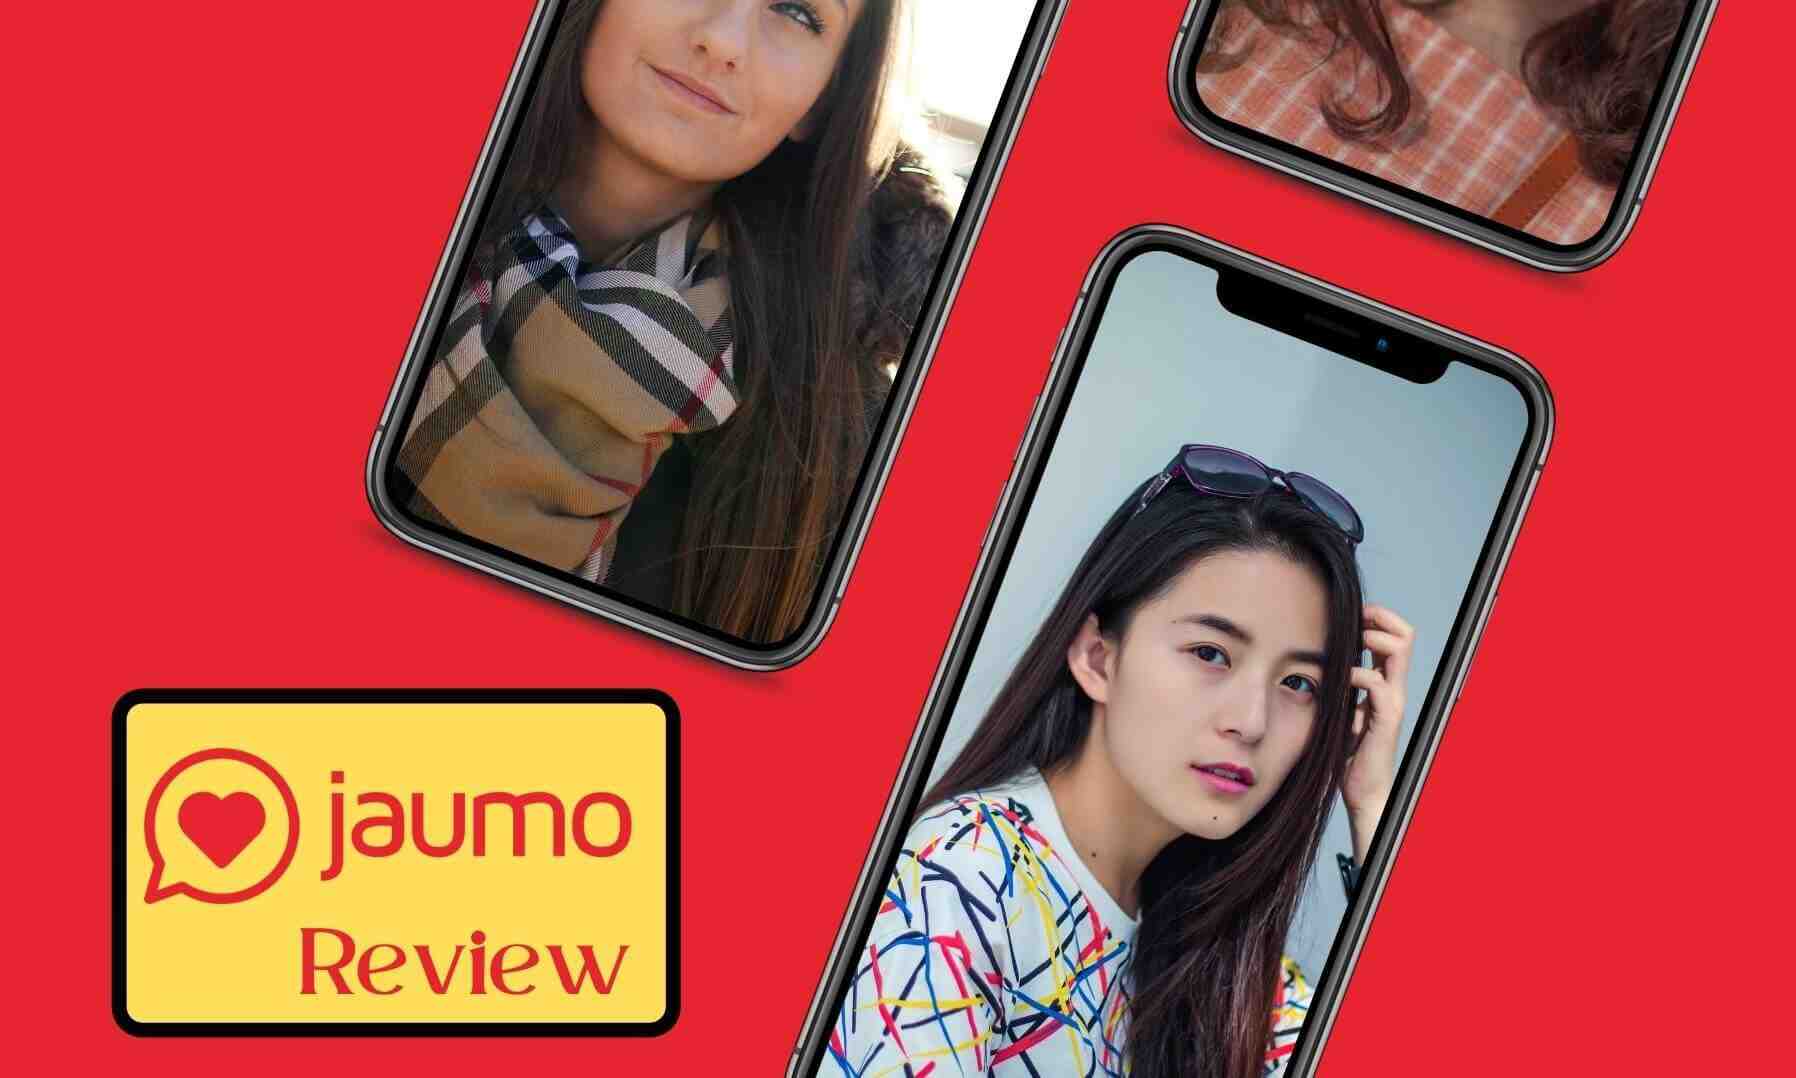 Jaumo Dating App Review